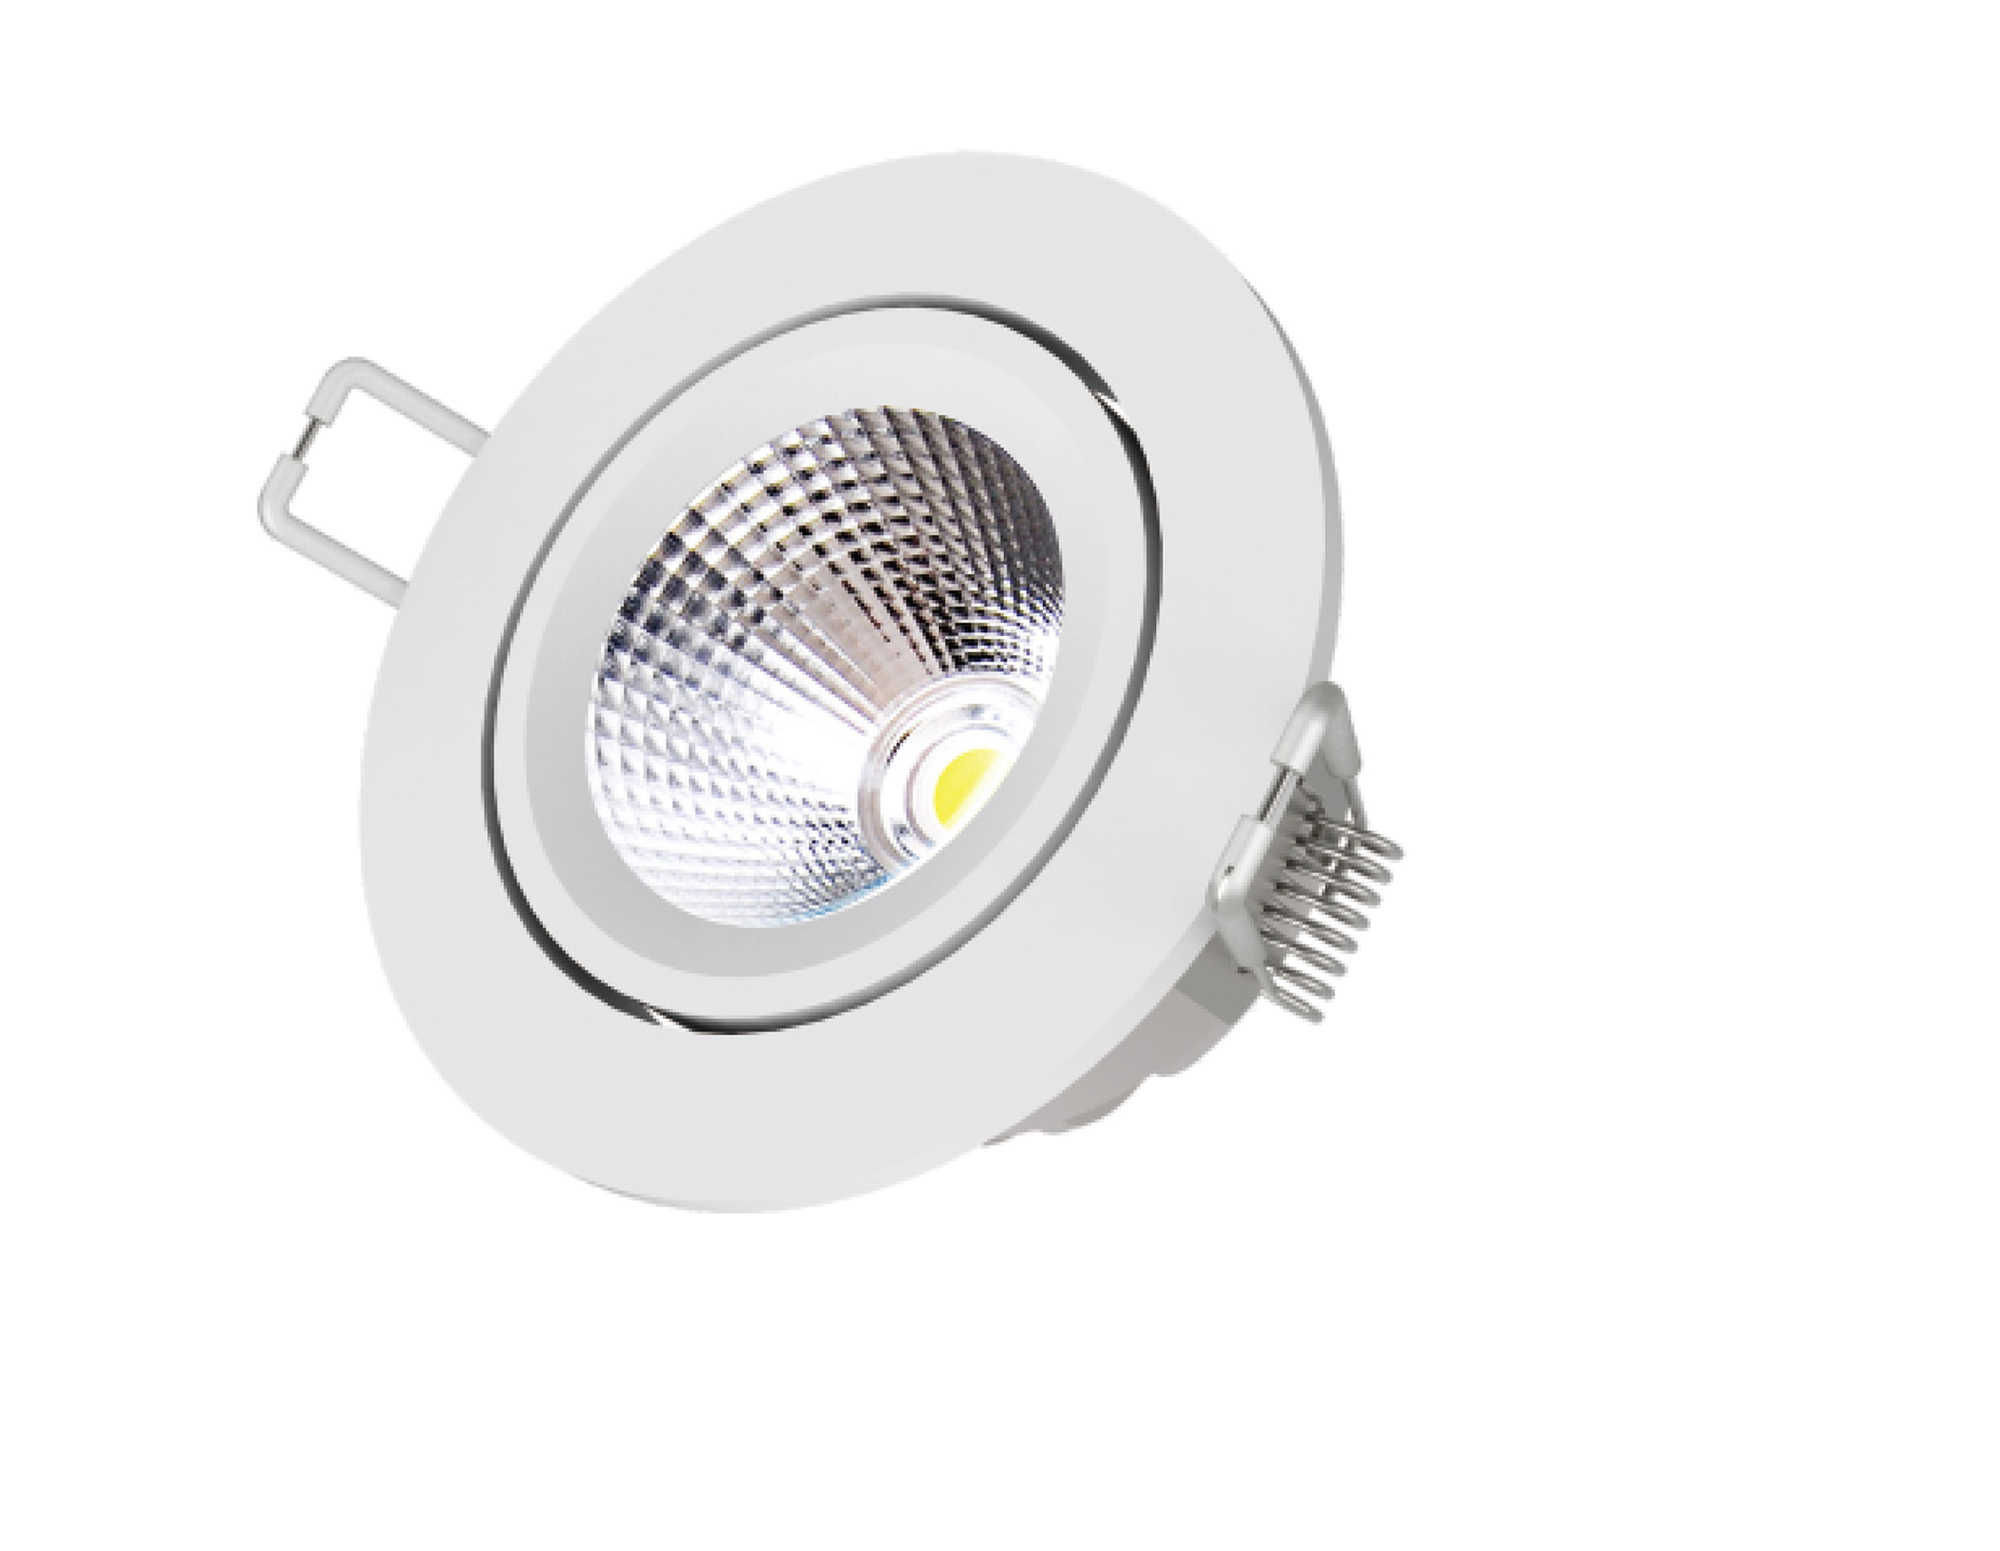 SD-04R-Y  Smart Spot light, RF 2.4GHz, 4W, Dimmable, 3000K, 24 degree beam angle, 200-240Vac, F75mm cut-out, IP20.